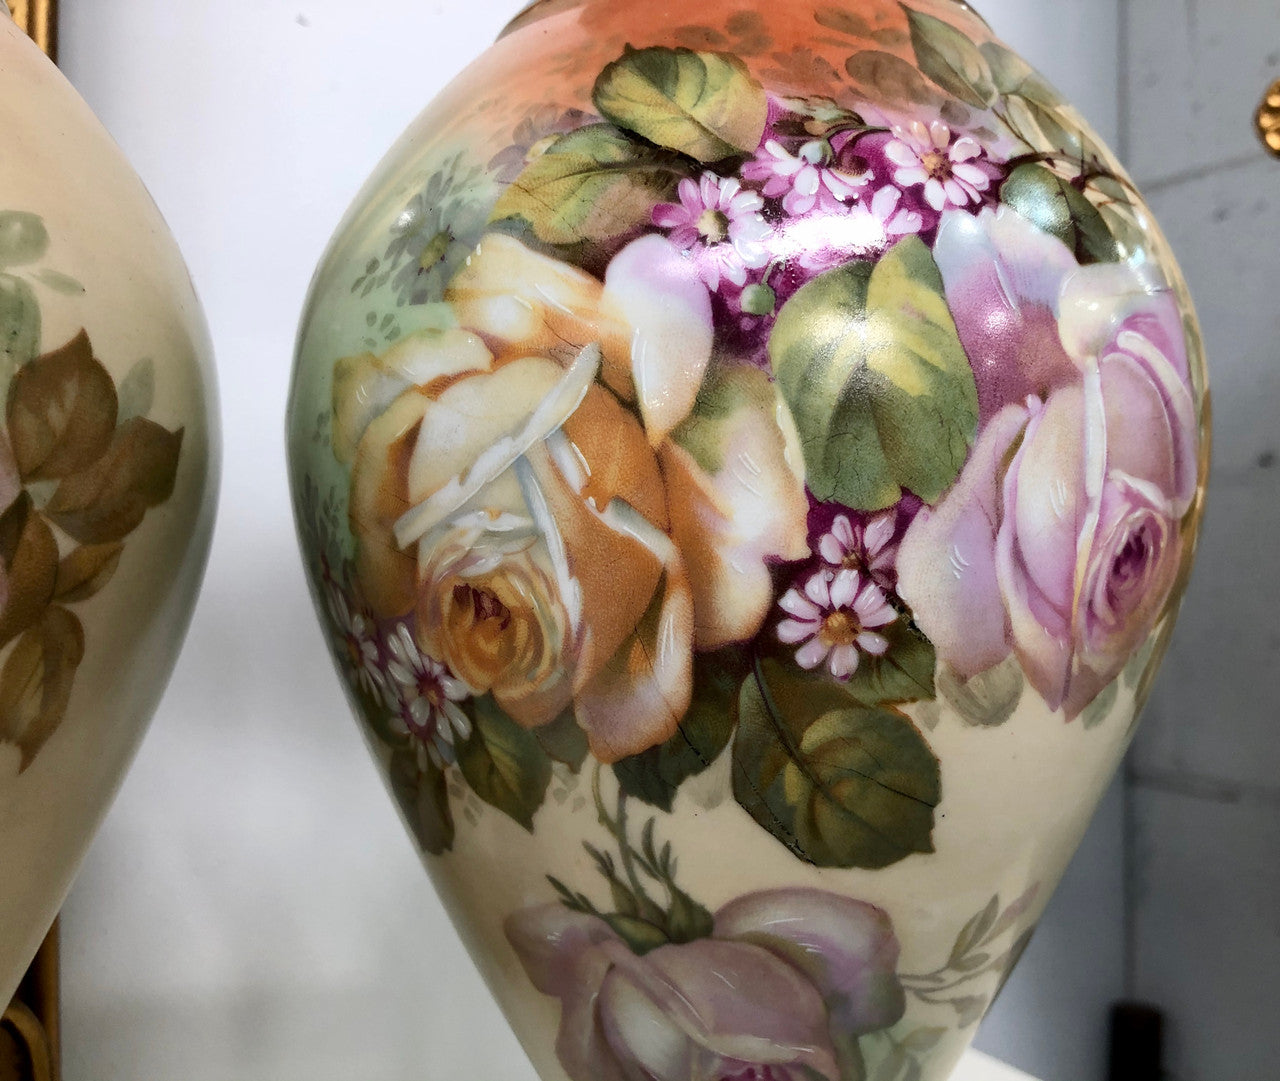 Pair Of French Antique Flower Decorated Vases